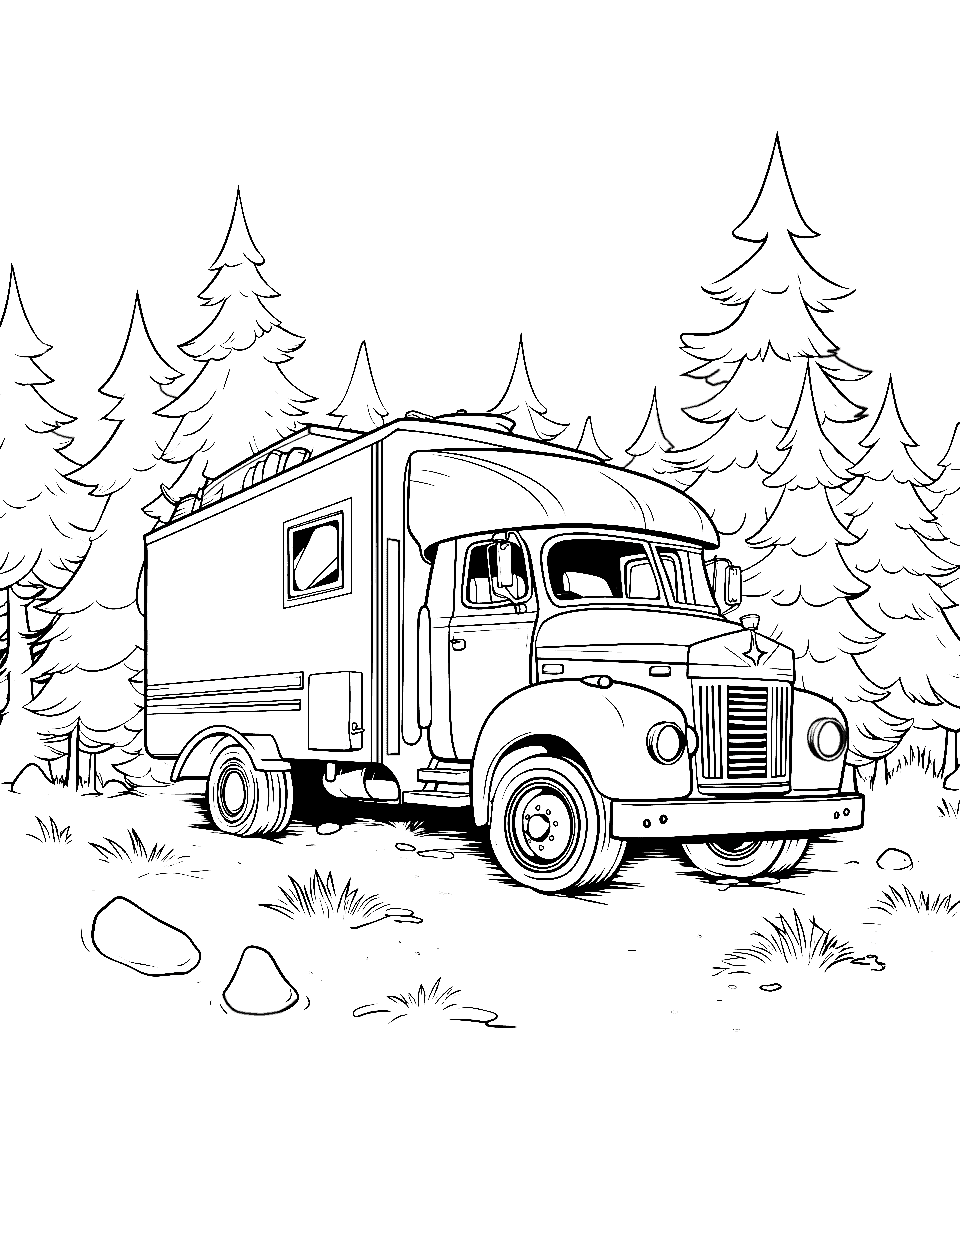 RV Camping Truck Coloring Page - An RV truck filled with camping equipment, ready to get unpacked on a campsite.